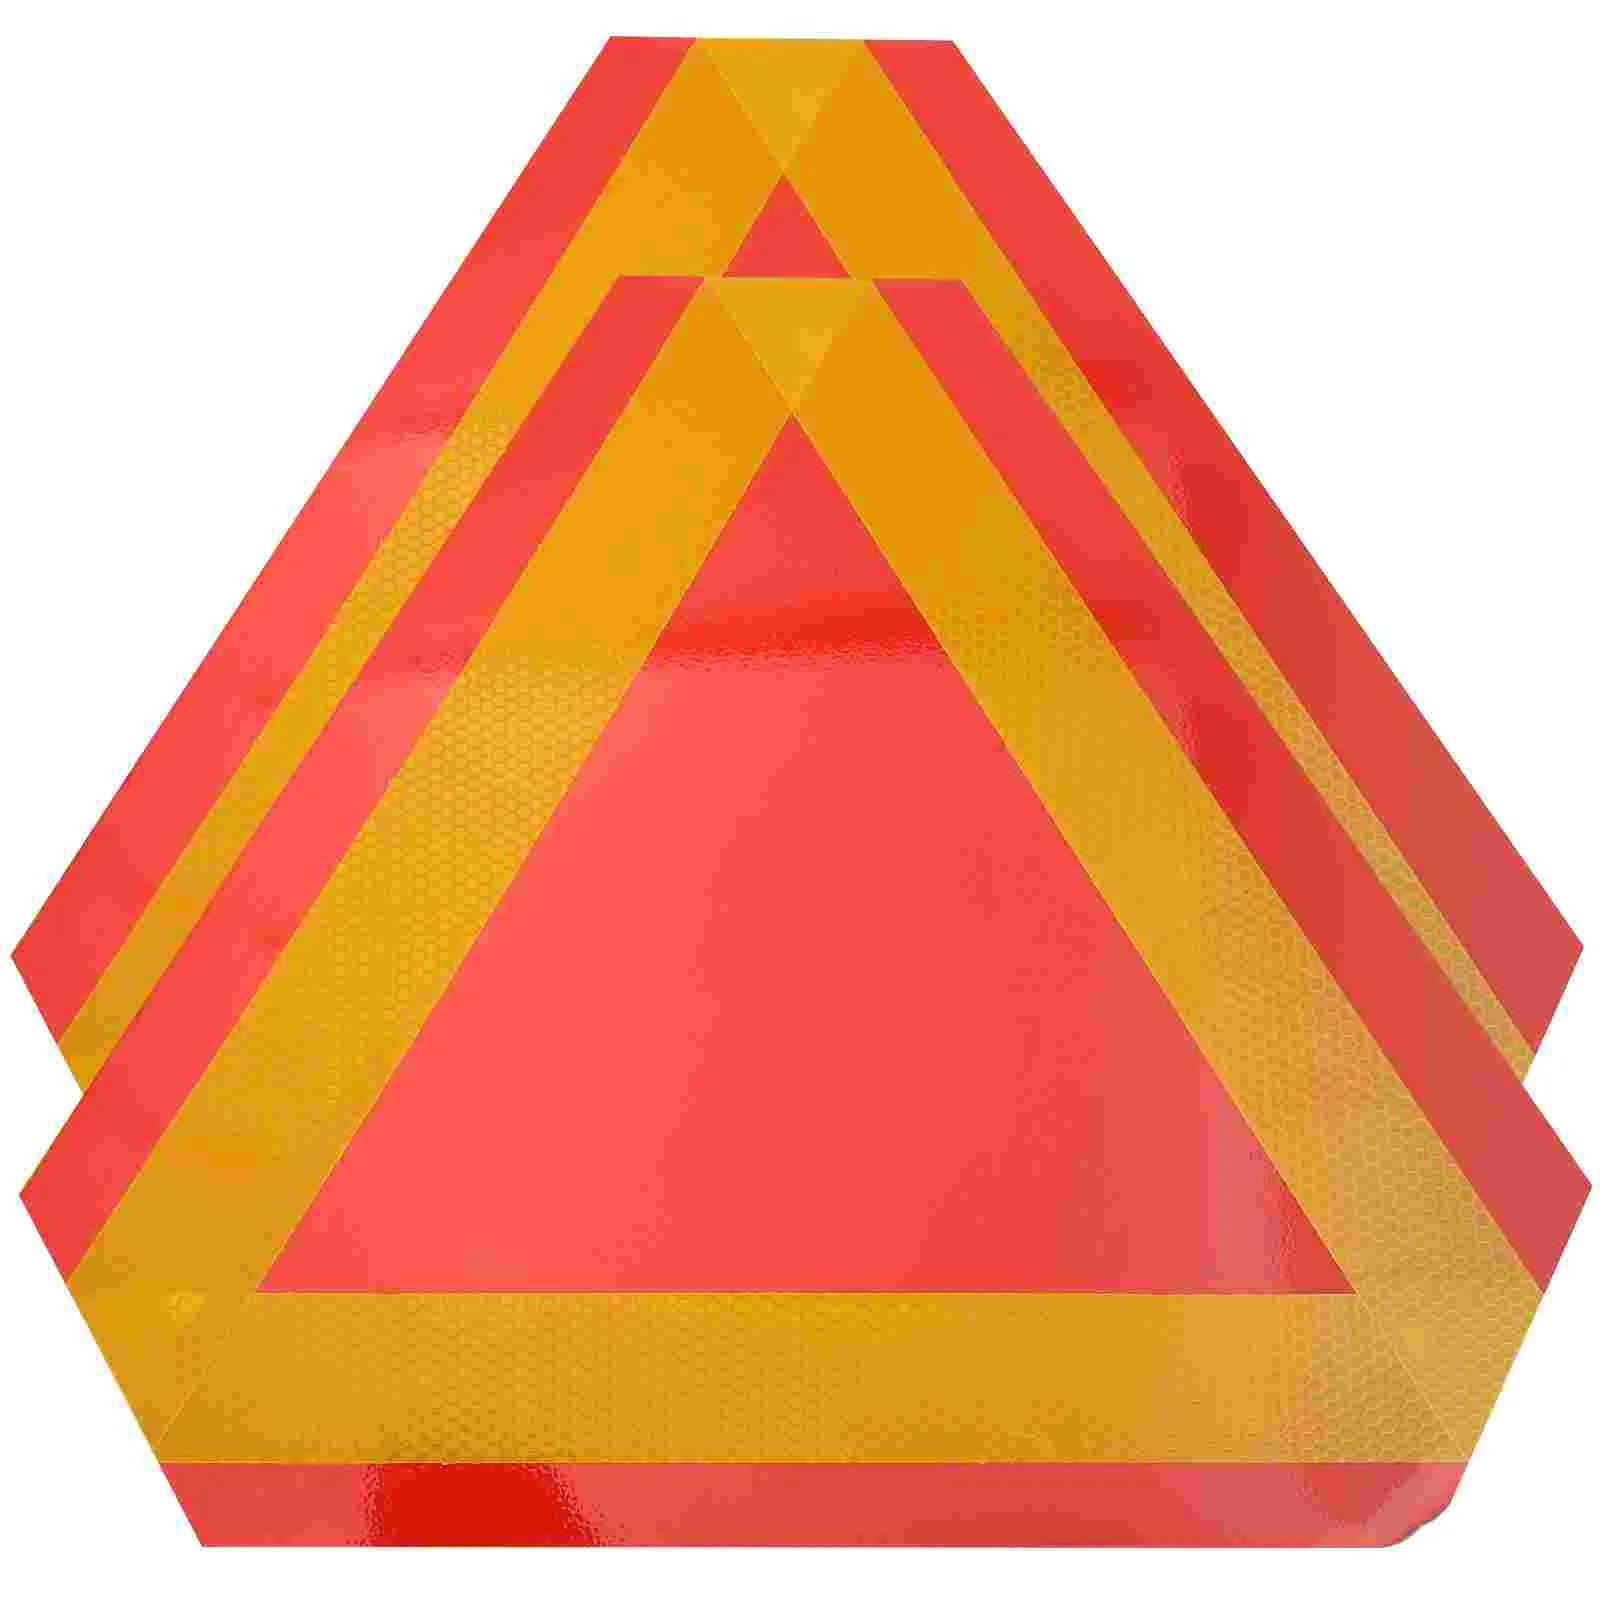 

2 Pcs Triangular Reflector Triangle Reflectors Vehicle Slow Moving Warning Sign Car Signs Accessory Safety The